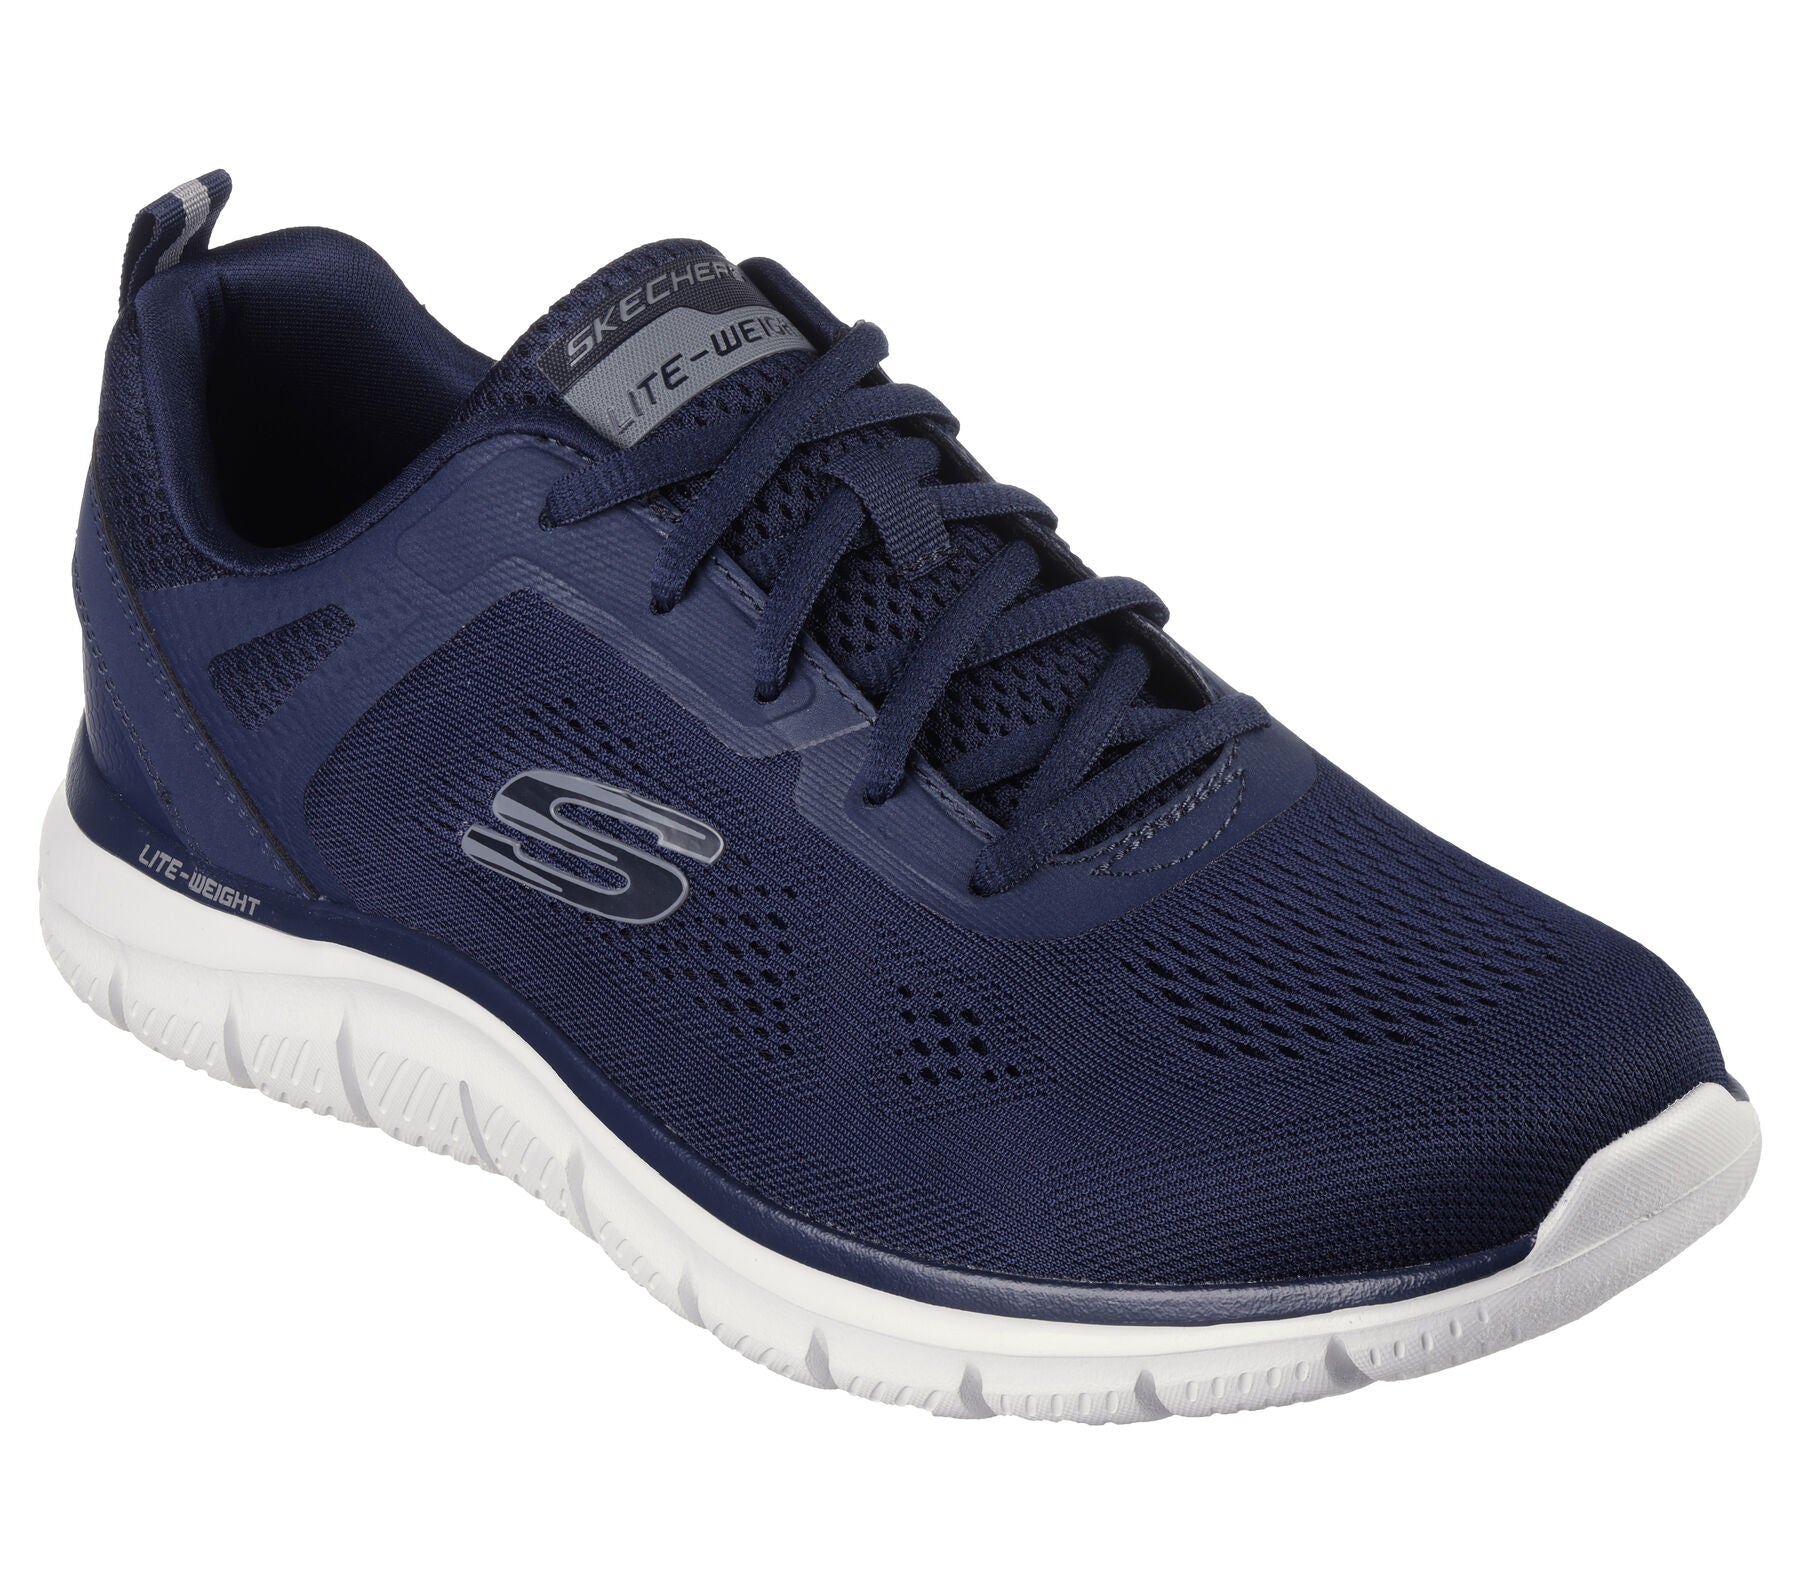 Full view of Skechers Track - Broader, highlighting its machine washable feature.